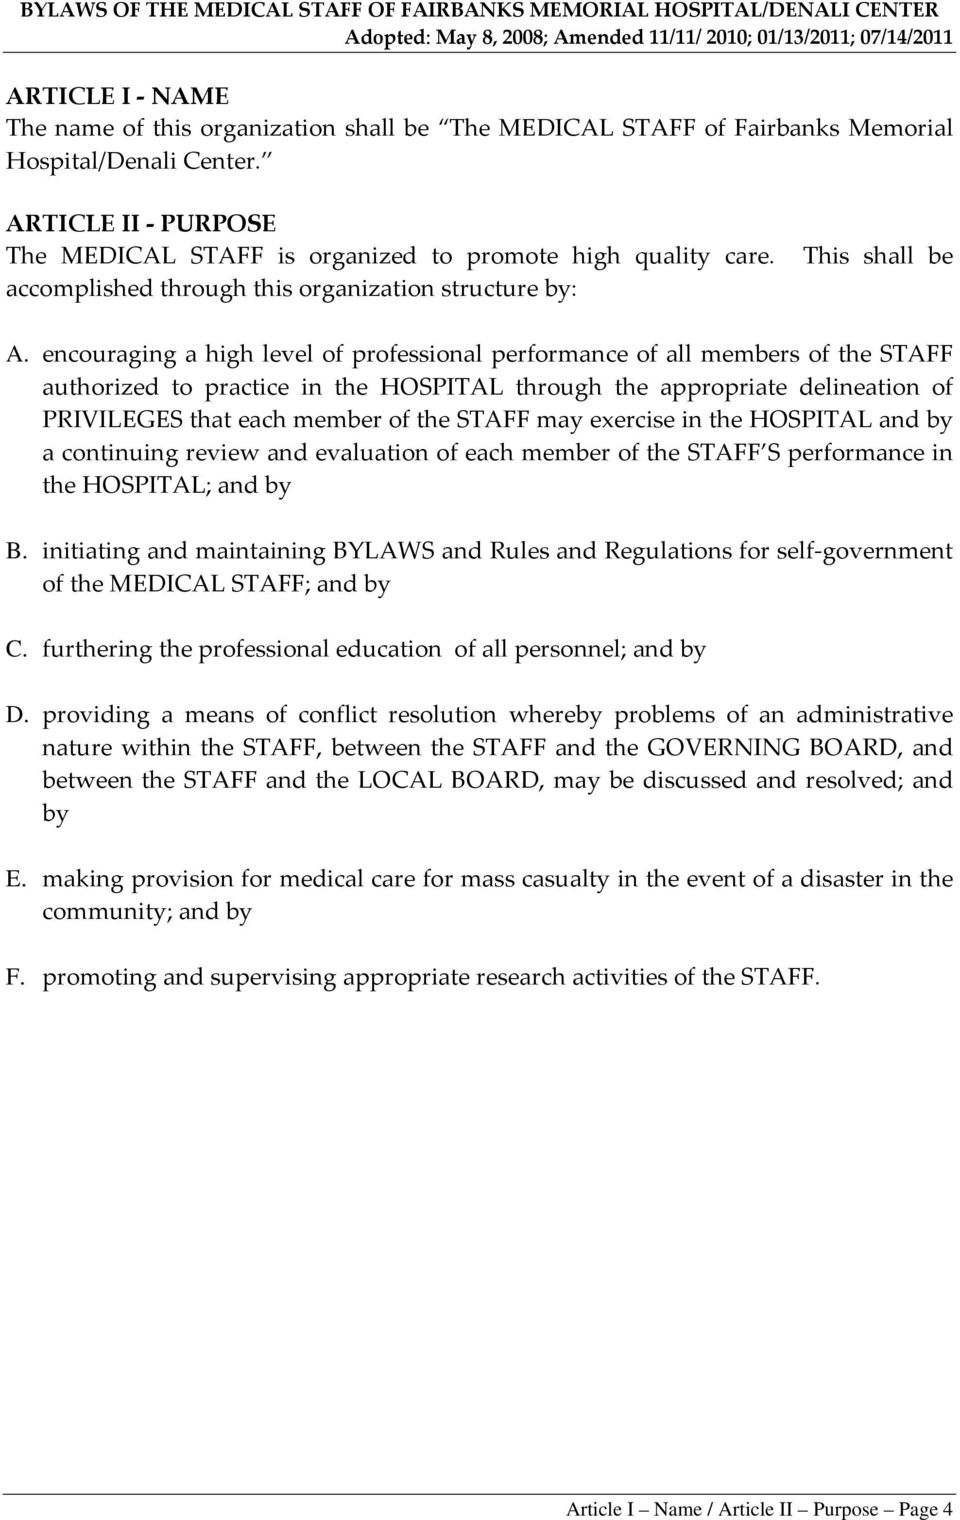 encouraging a high level of professional performance of all members of the STAFF authorized to practice in the HOSPITAL through the appropriate delineation of PRIVILEGES that each member of the STAFF